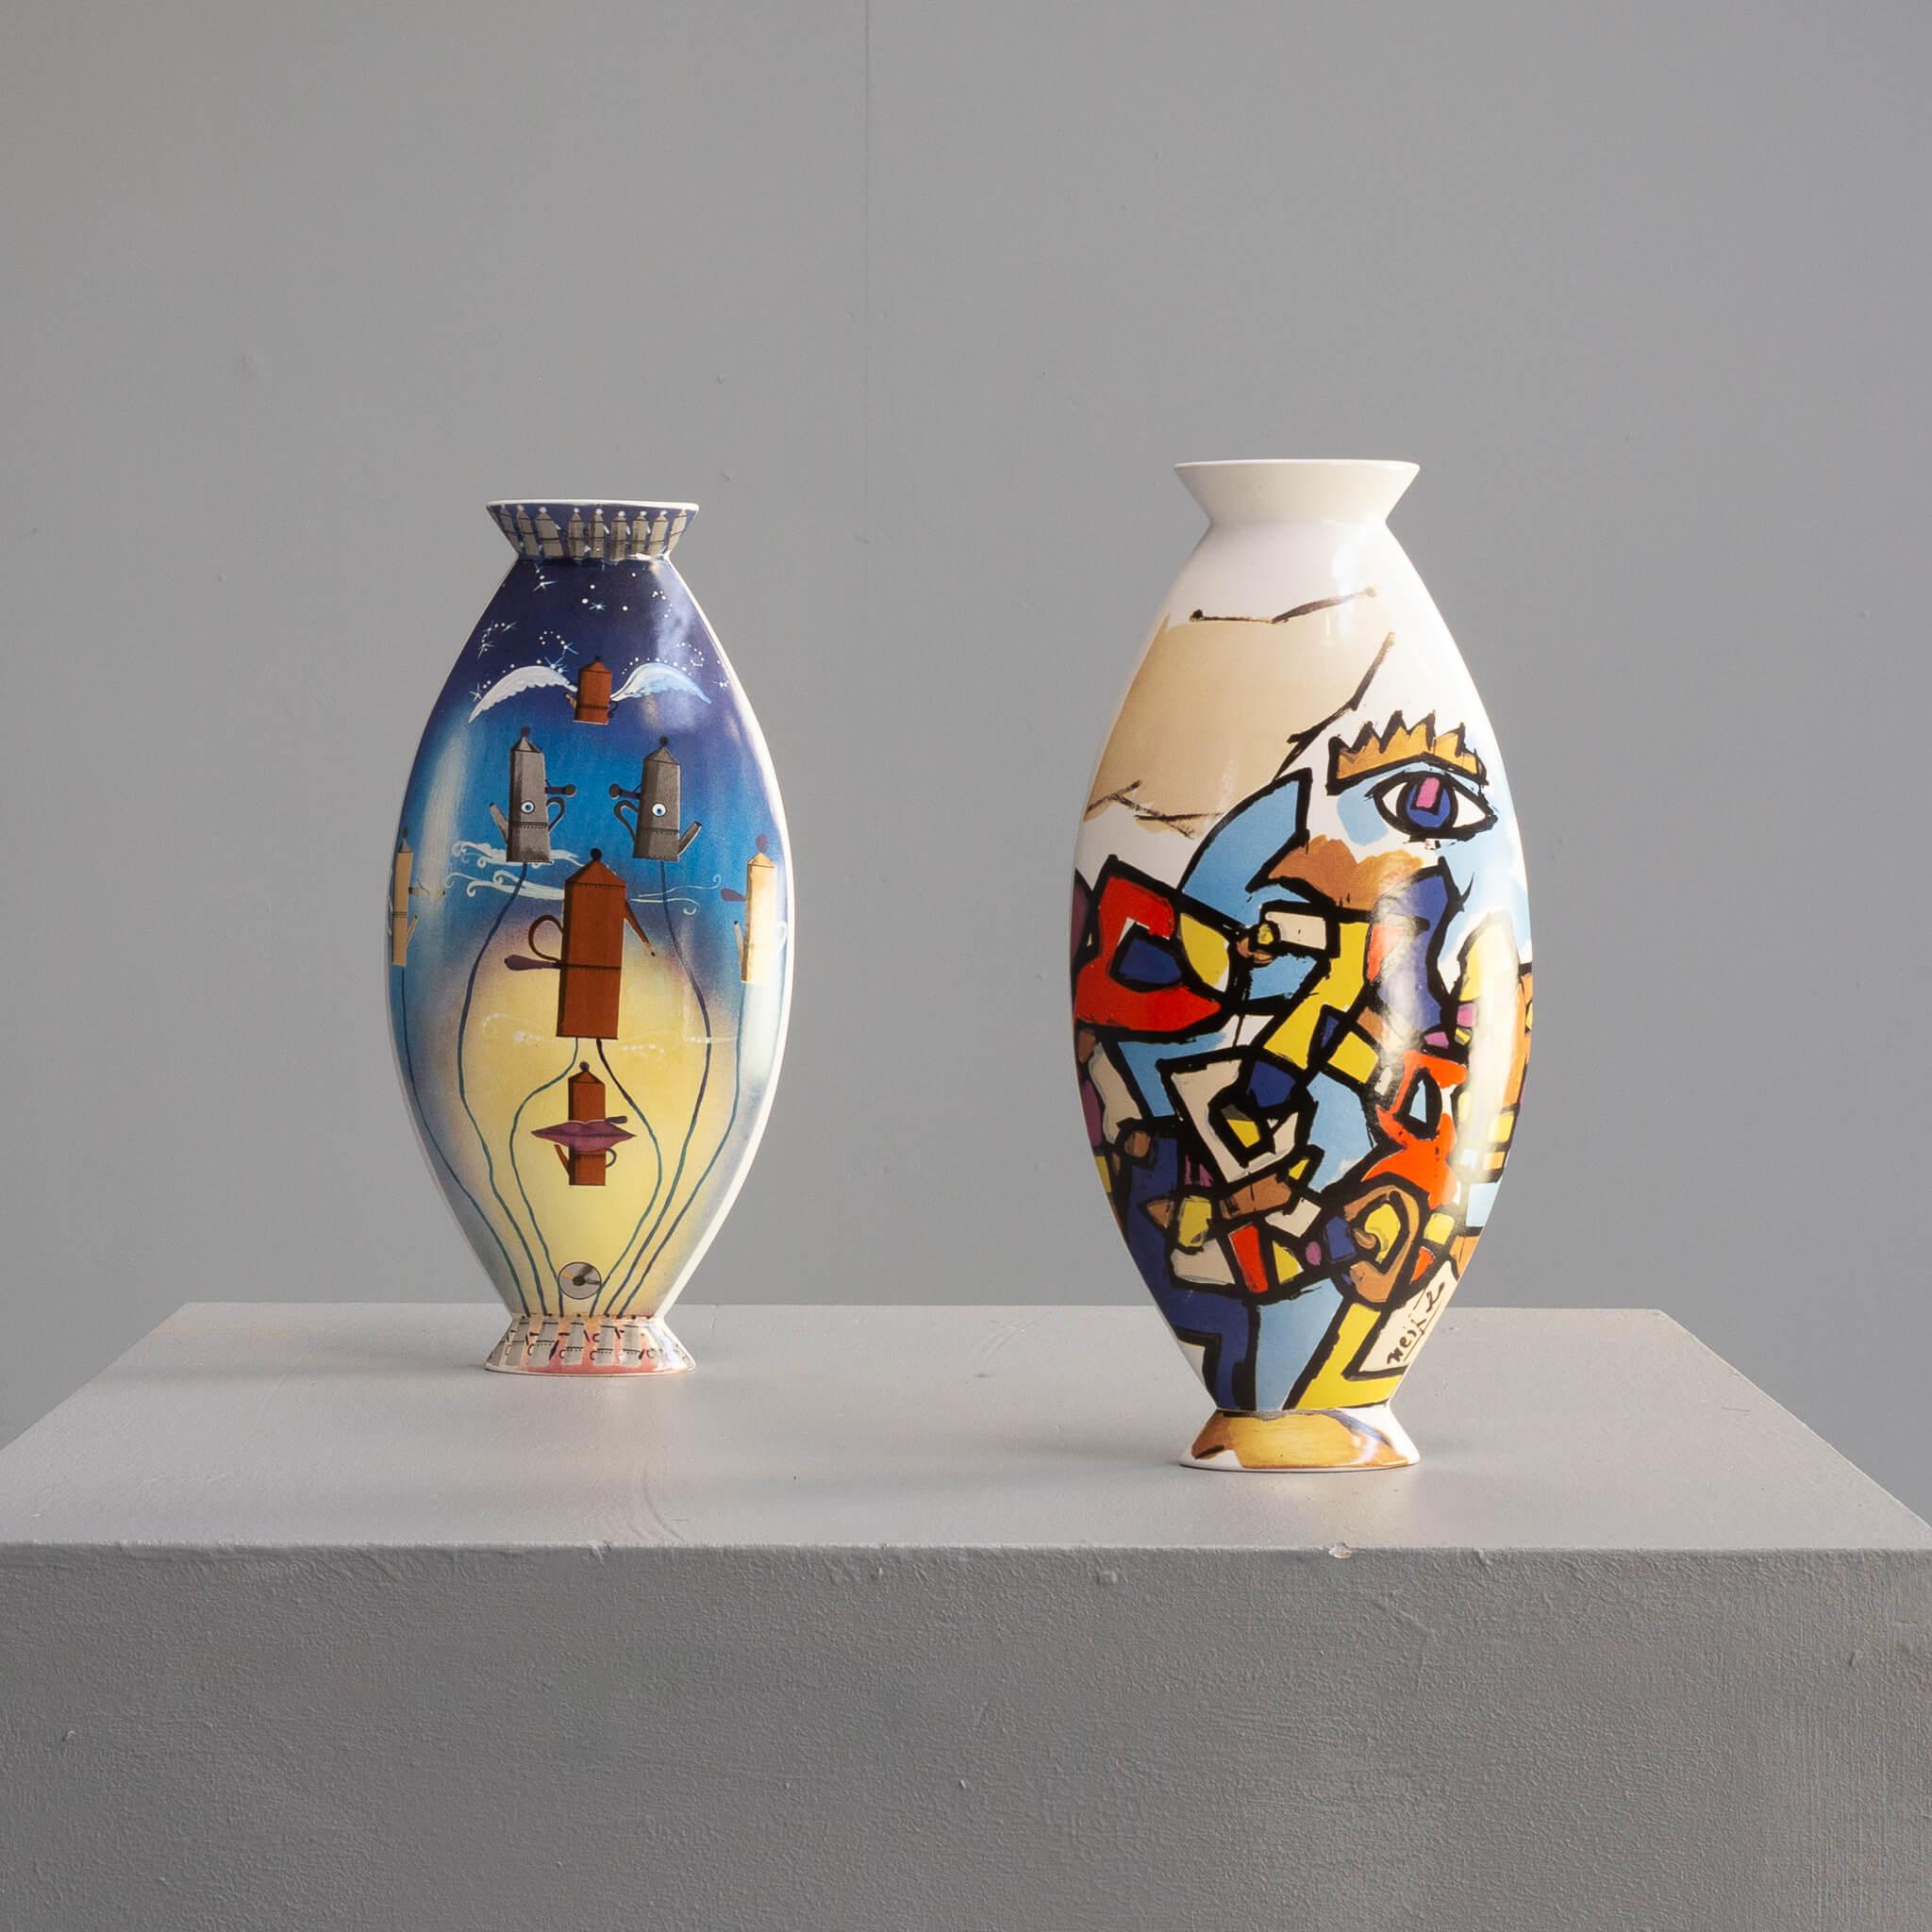 A set of 2 unique vases which comes from a series of ceramic vases designed in a project named ‘The Memphis Design Group’ by Ettore Sottsass, Mendini and Guerriero, among others.
The series includes 30 vases, each designed by one of Italy’s most